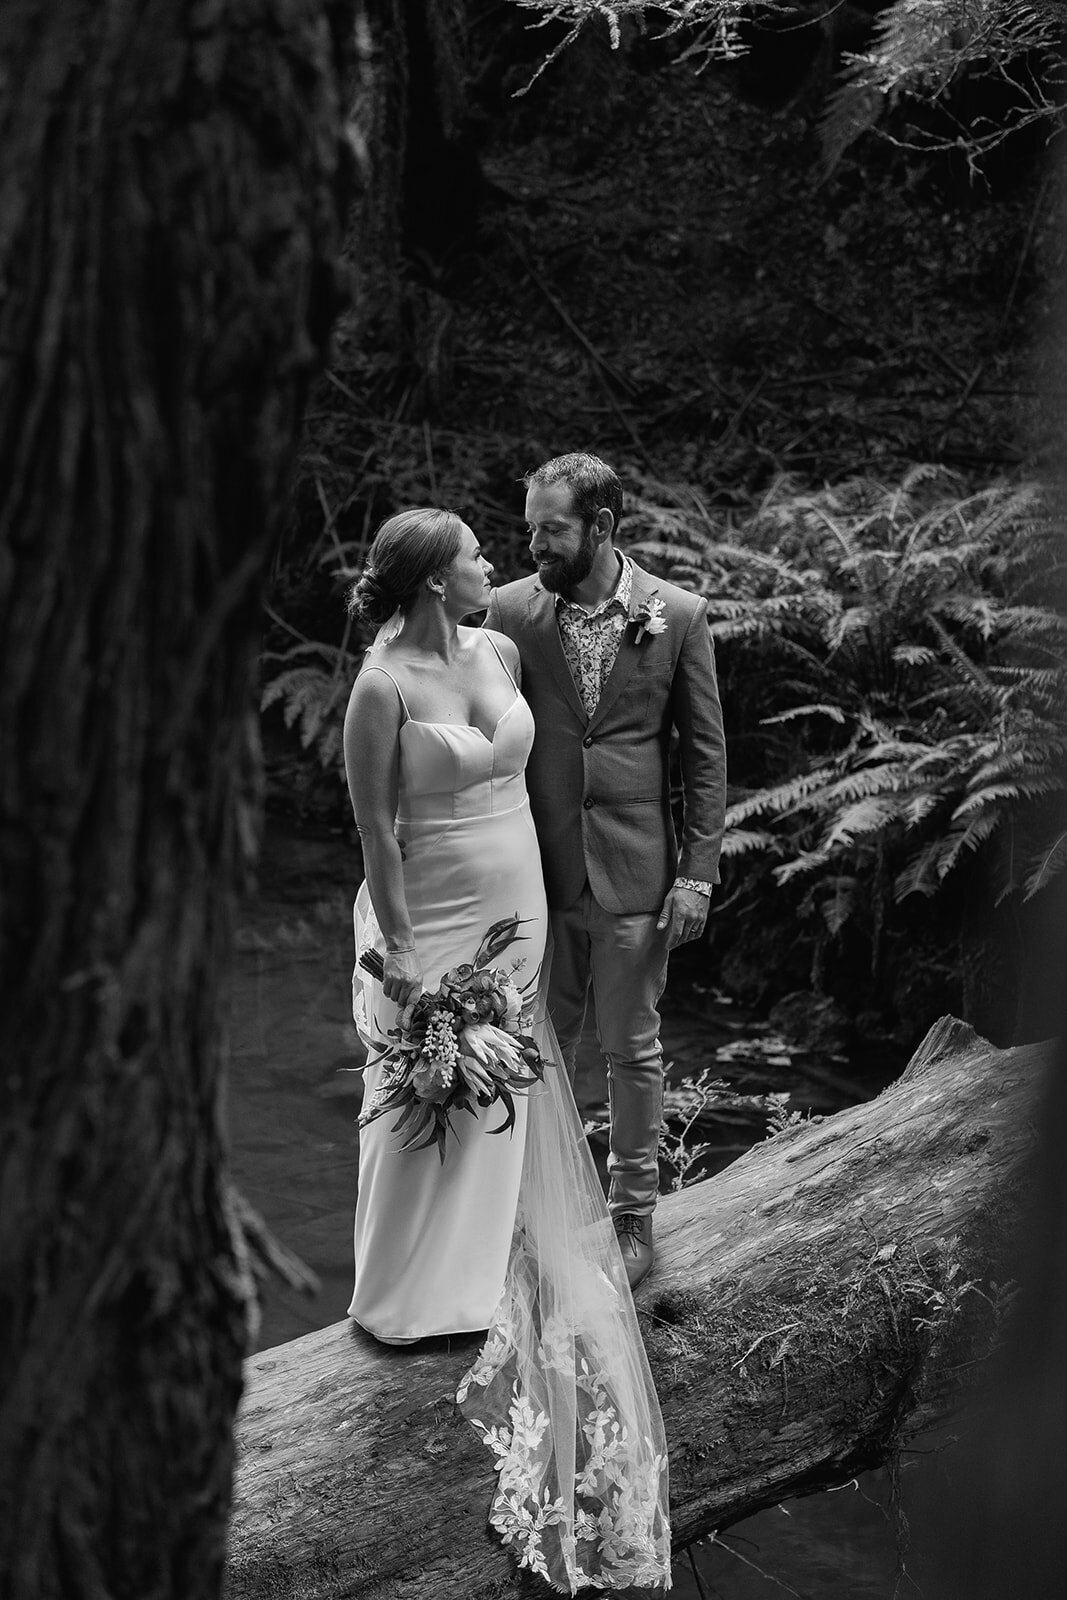 Stacey&Cory-Coast&Pines-388